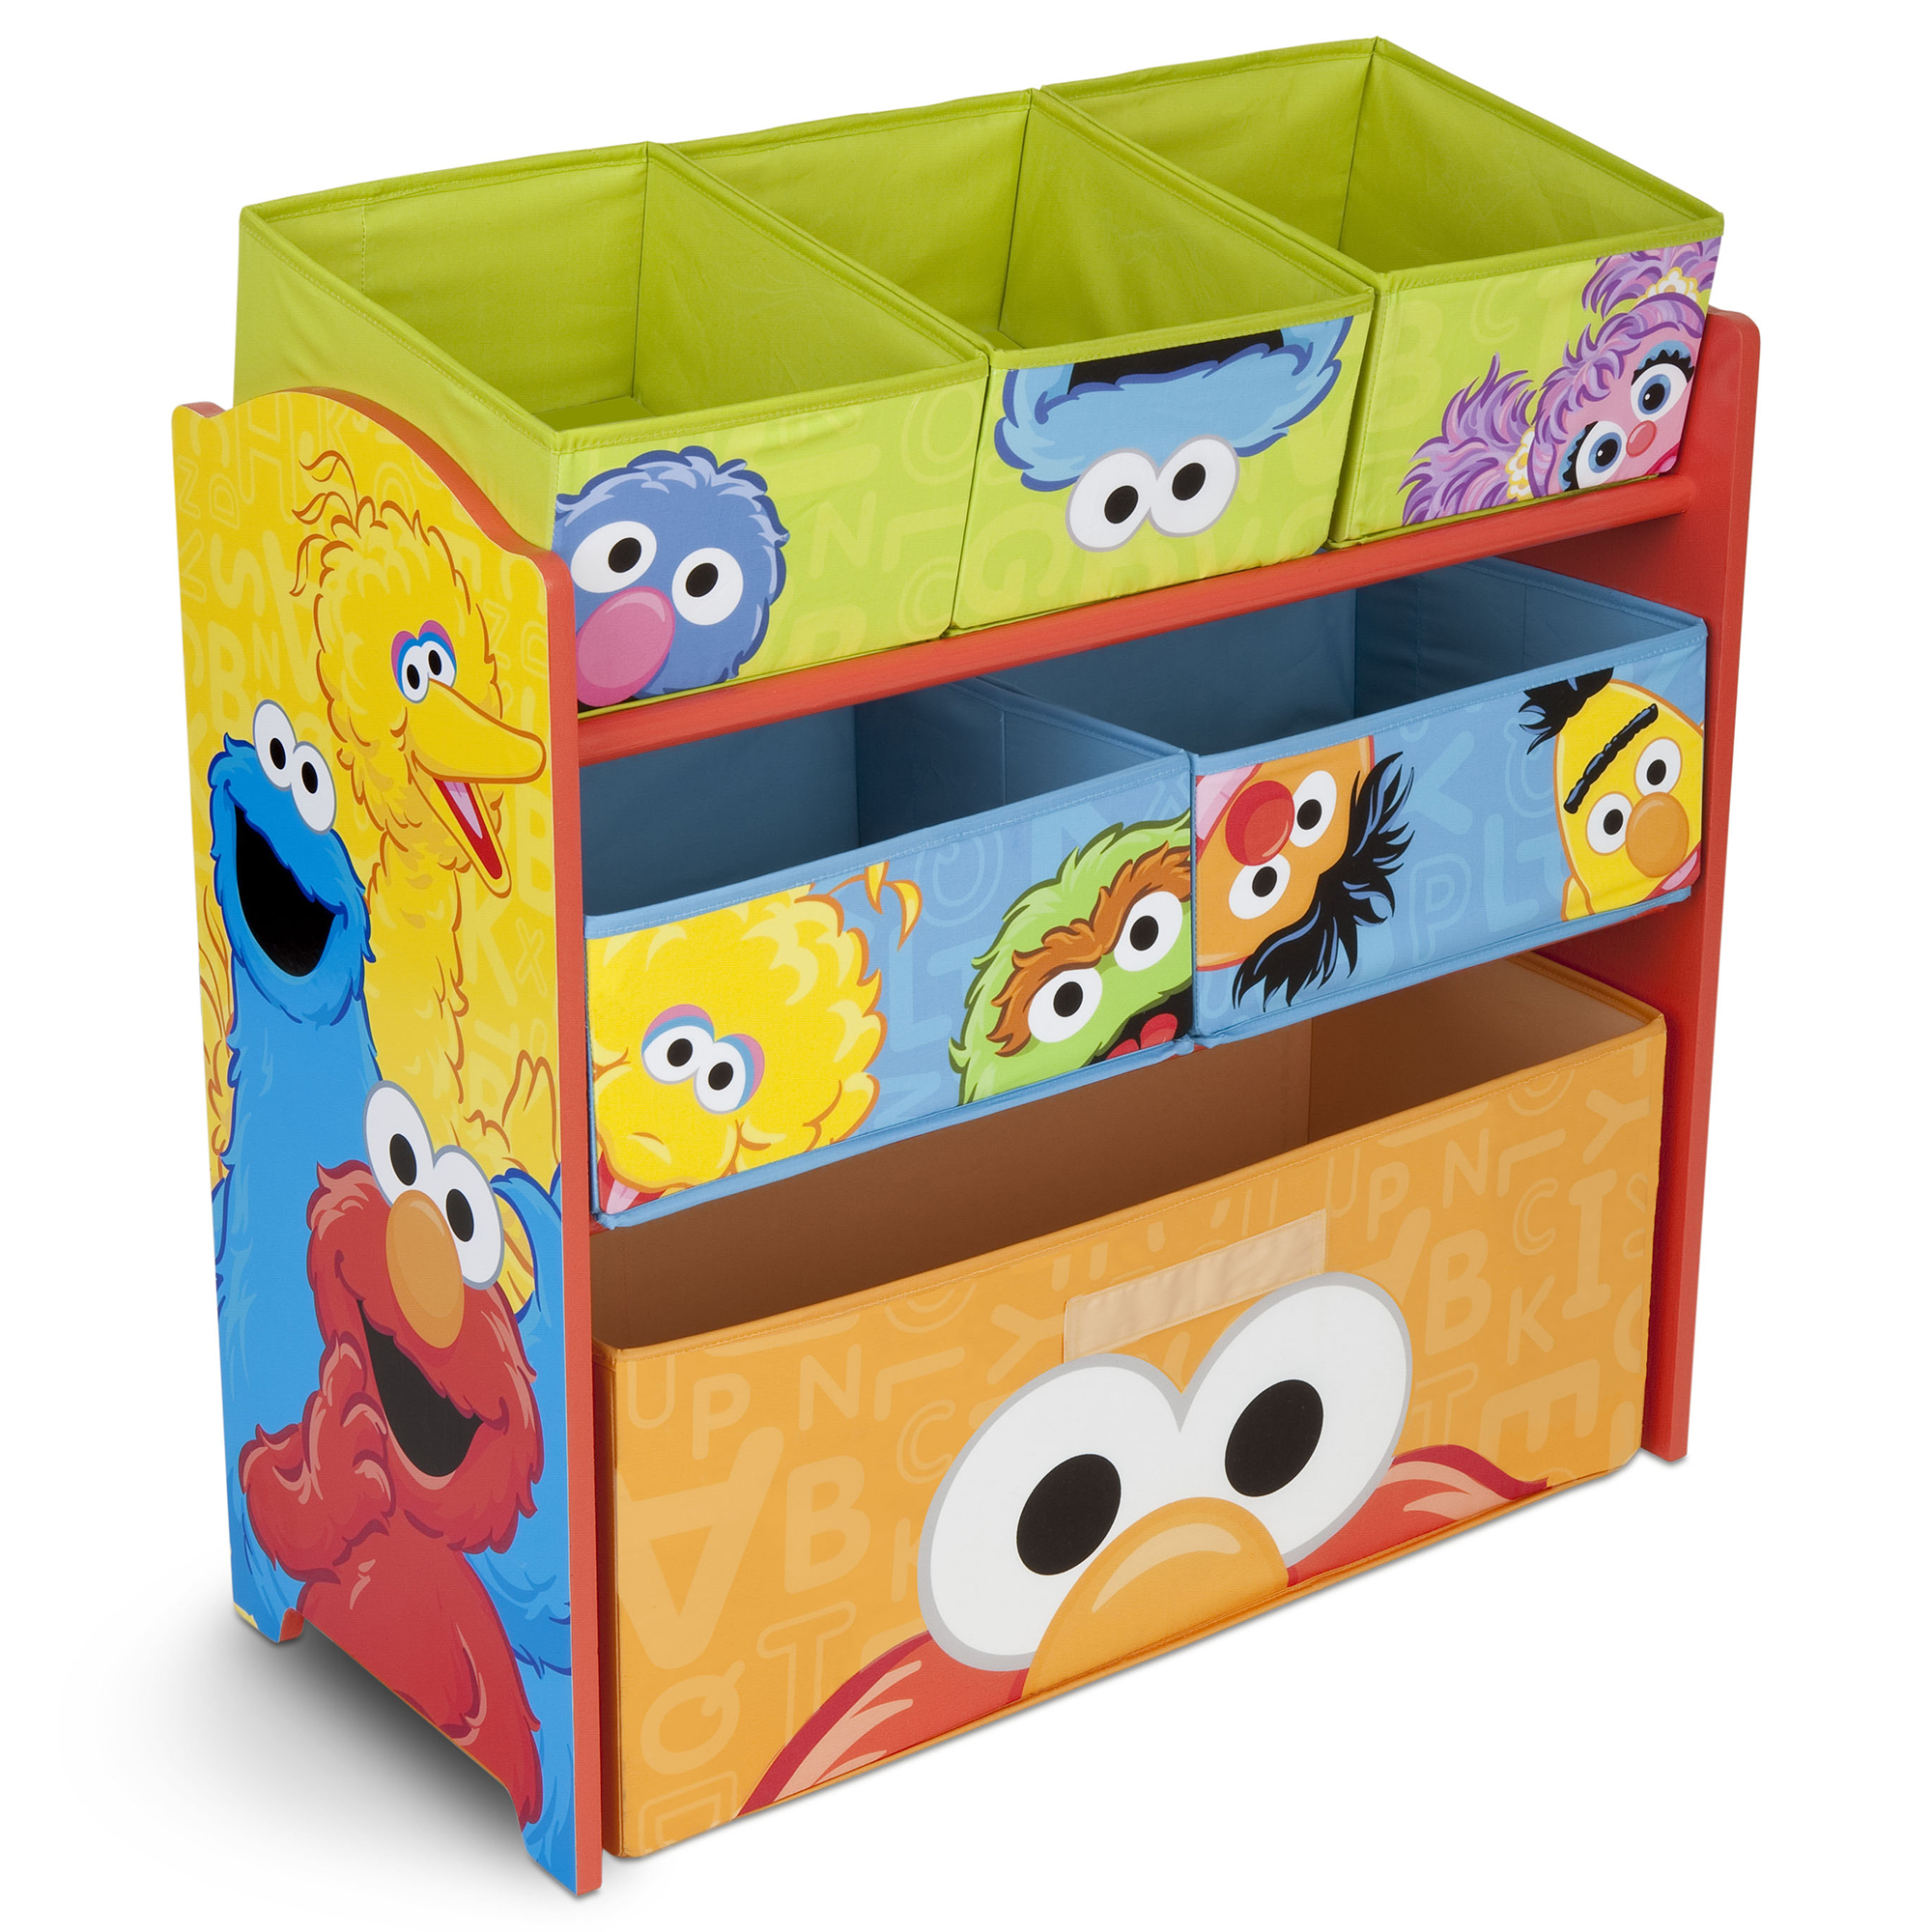 Sesame Street 6 Bin Design and Store Toy Organizer by Delta Children - Durable Engineered Wood, Solid Wood and Fabric Construction, Multi Color - image 1 of 8